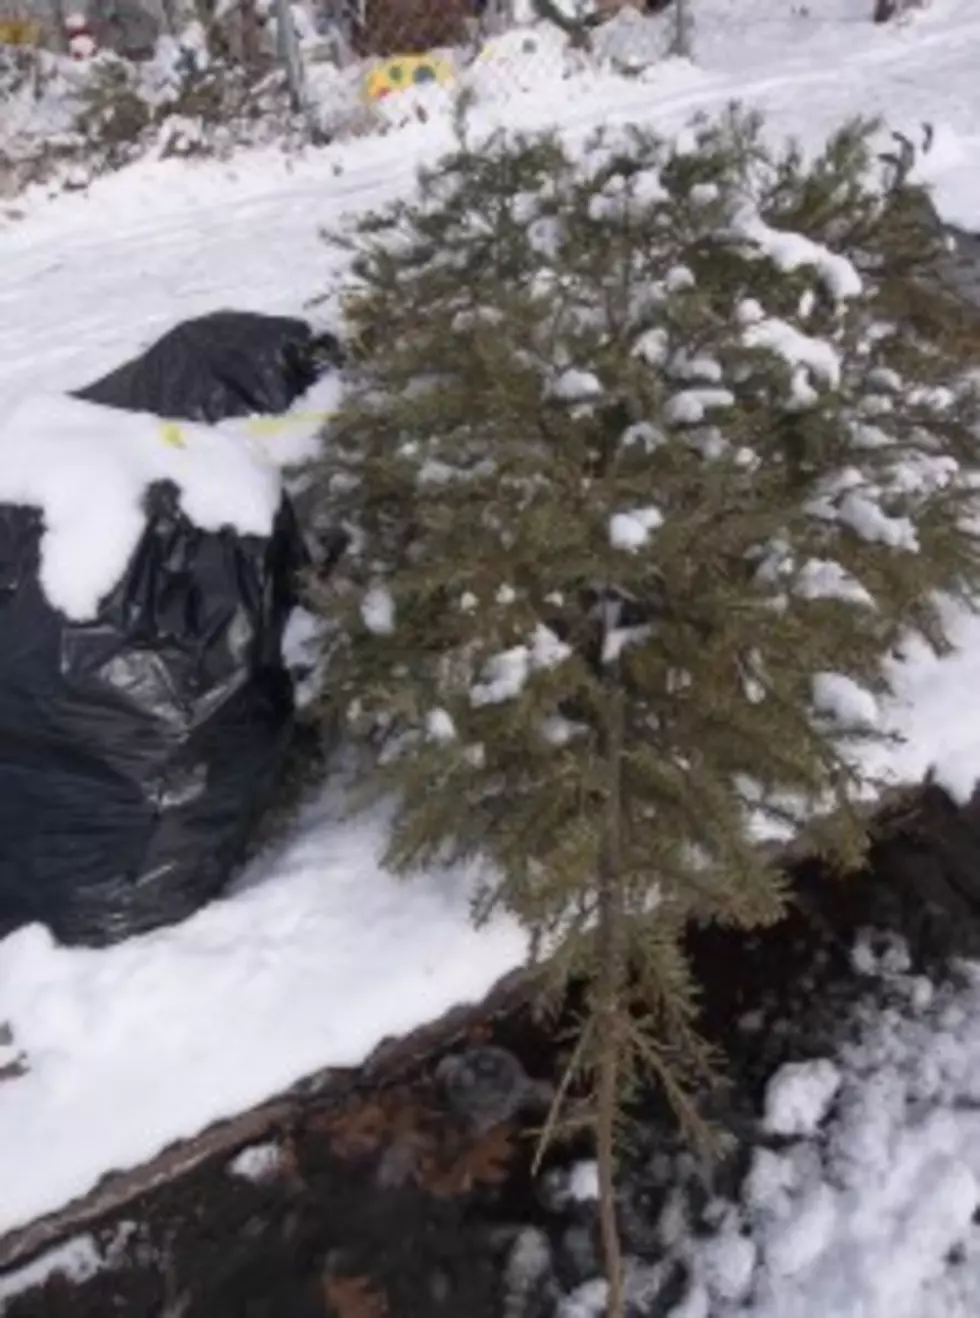 The Best Time To Discard Your Christmas Tree?